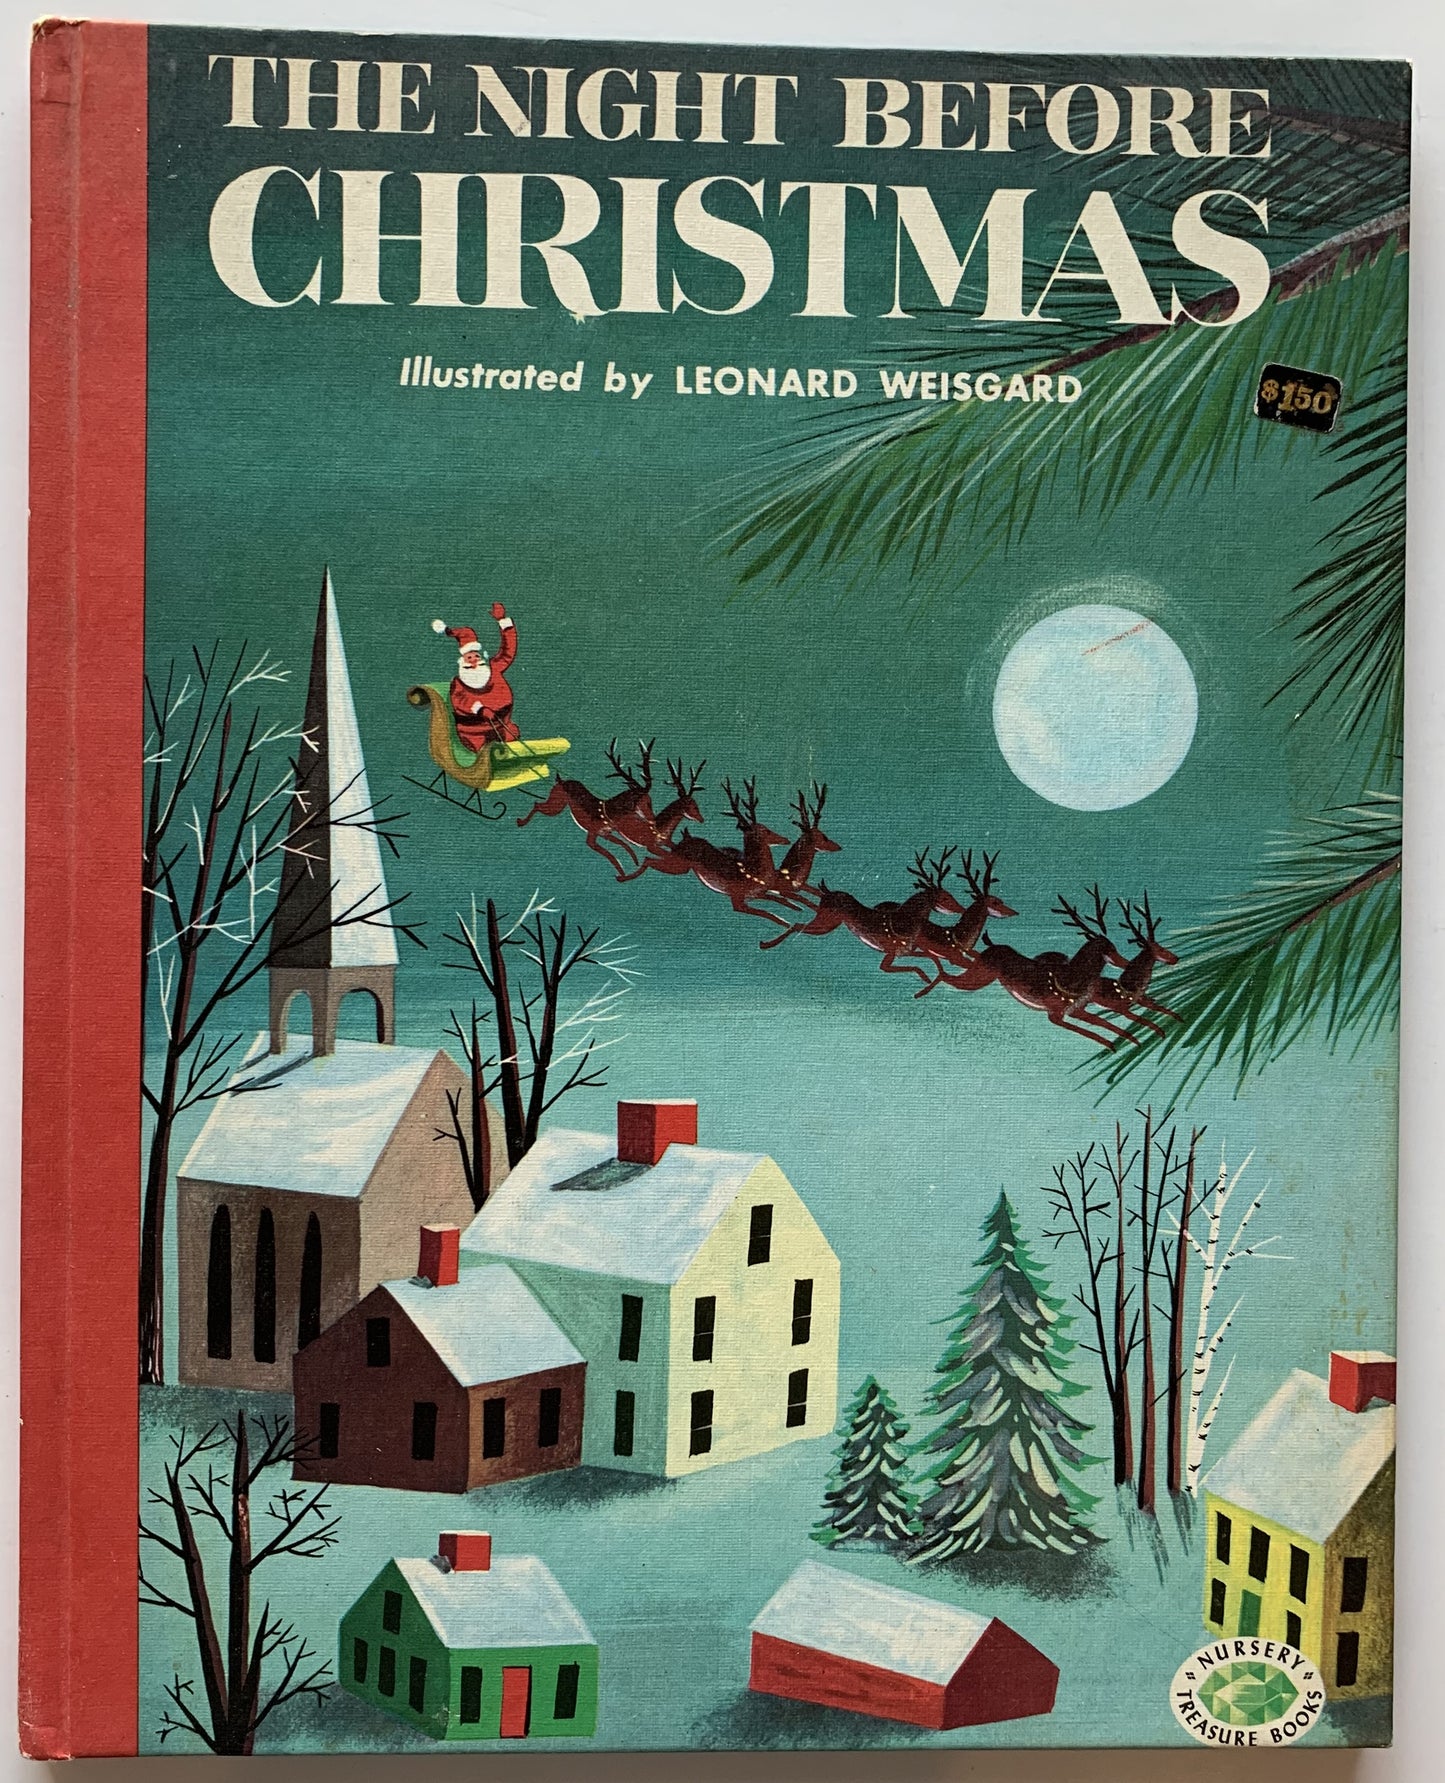 The Night Before Christmas illustrated by Leonard Weisgard 1975 edition